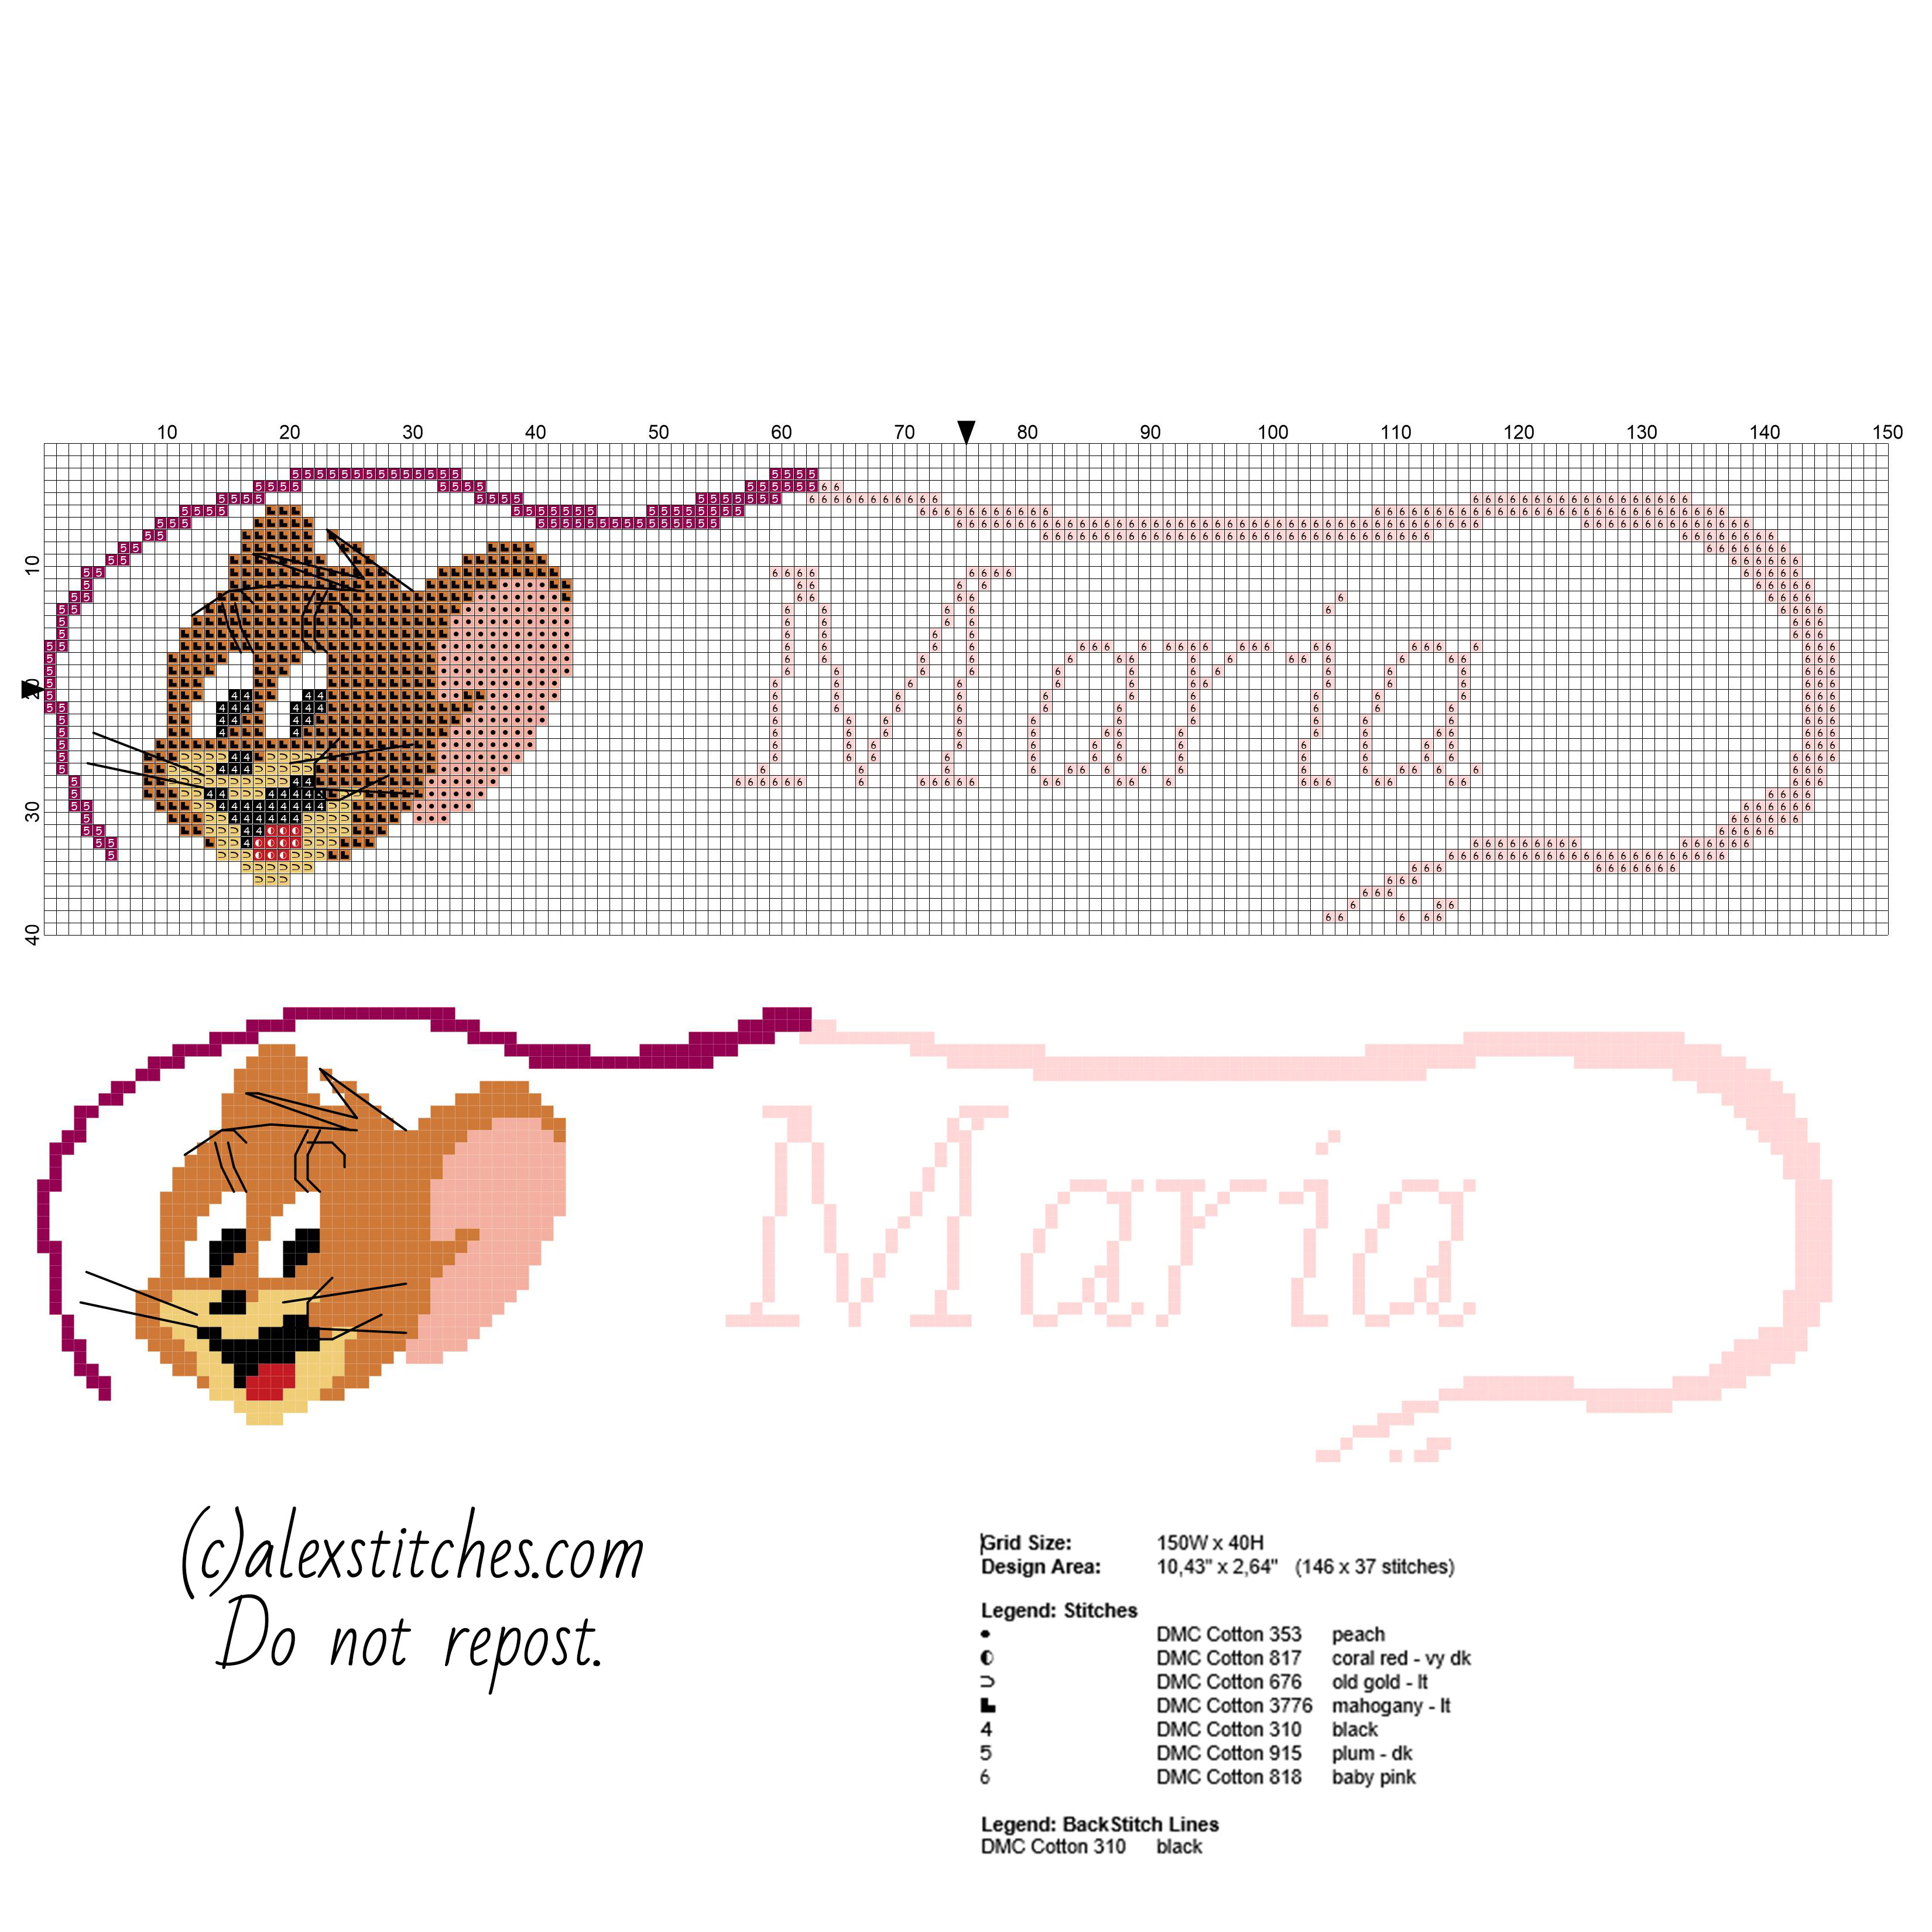 Cross stitch name Maria with Jerry from Tom and Jerry cartoon